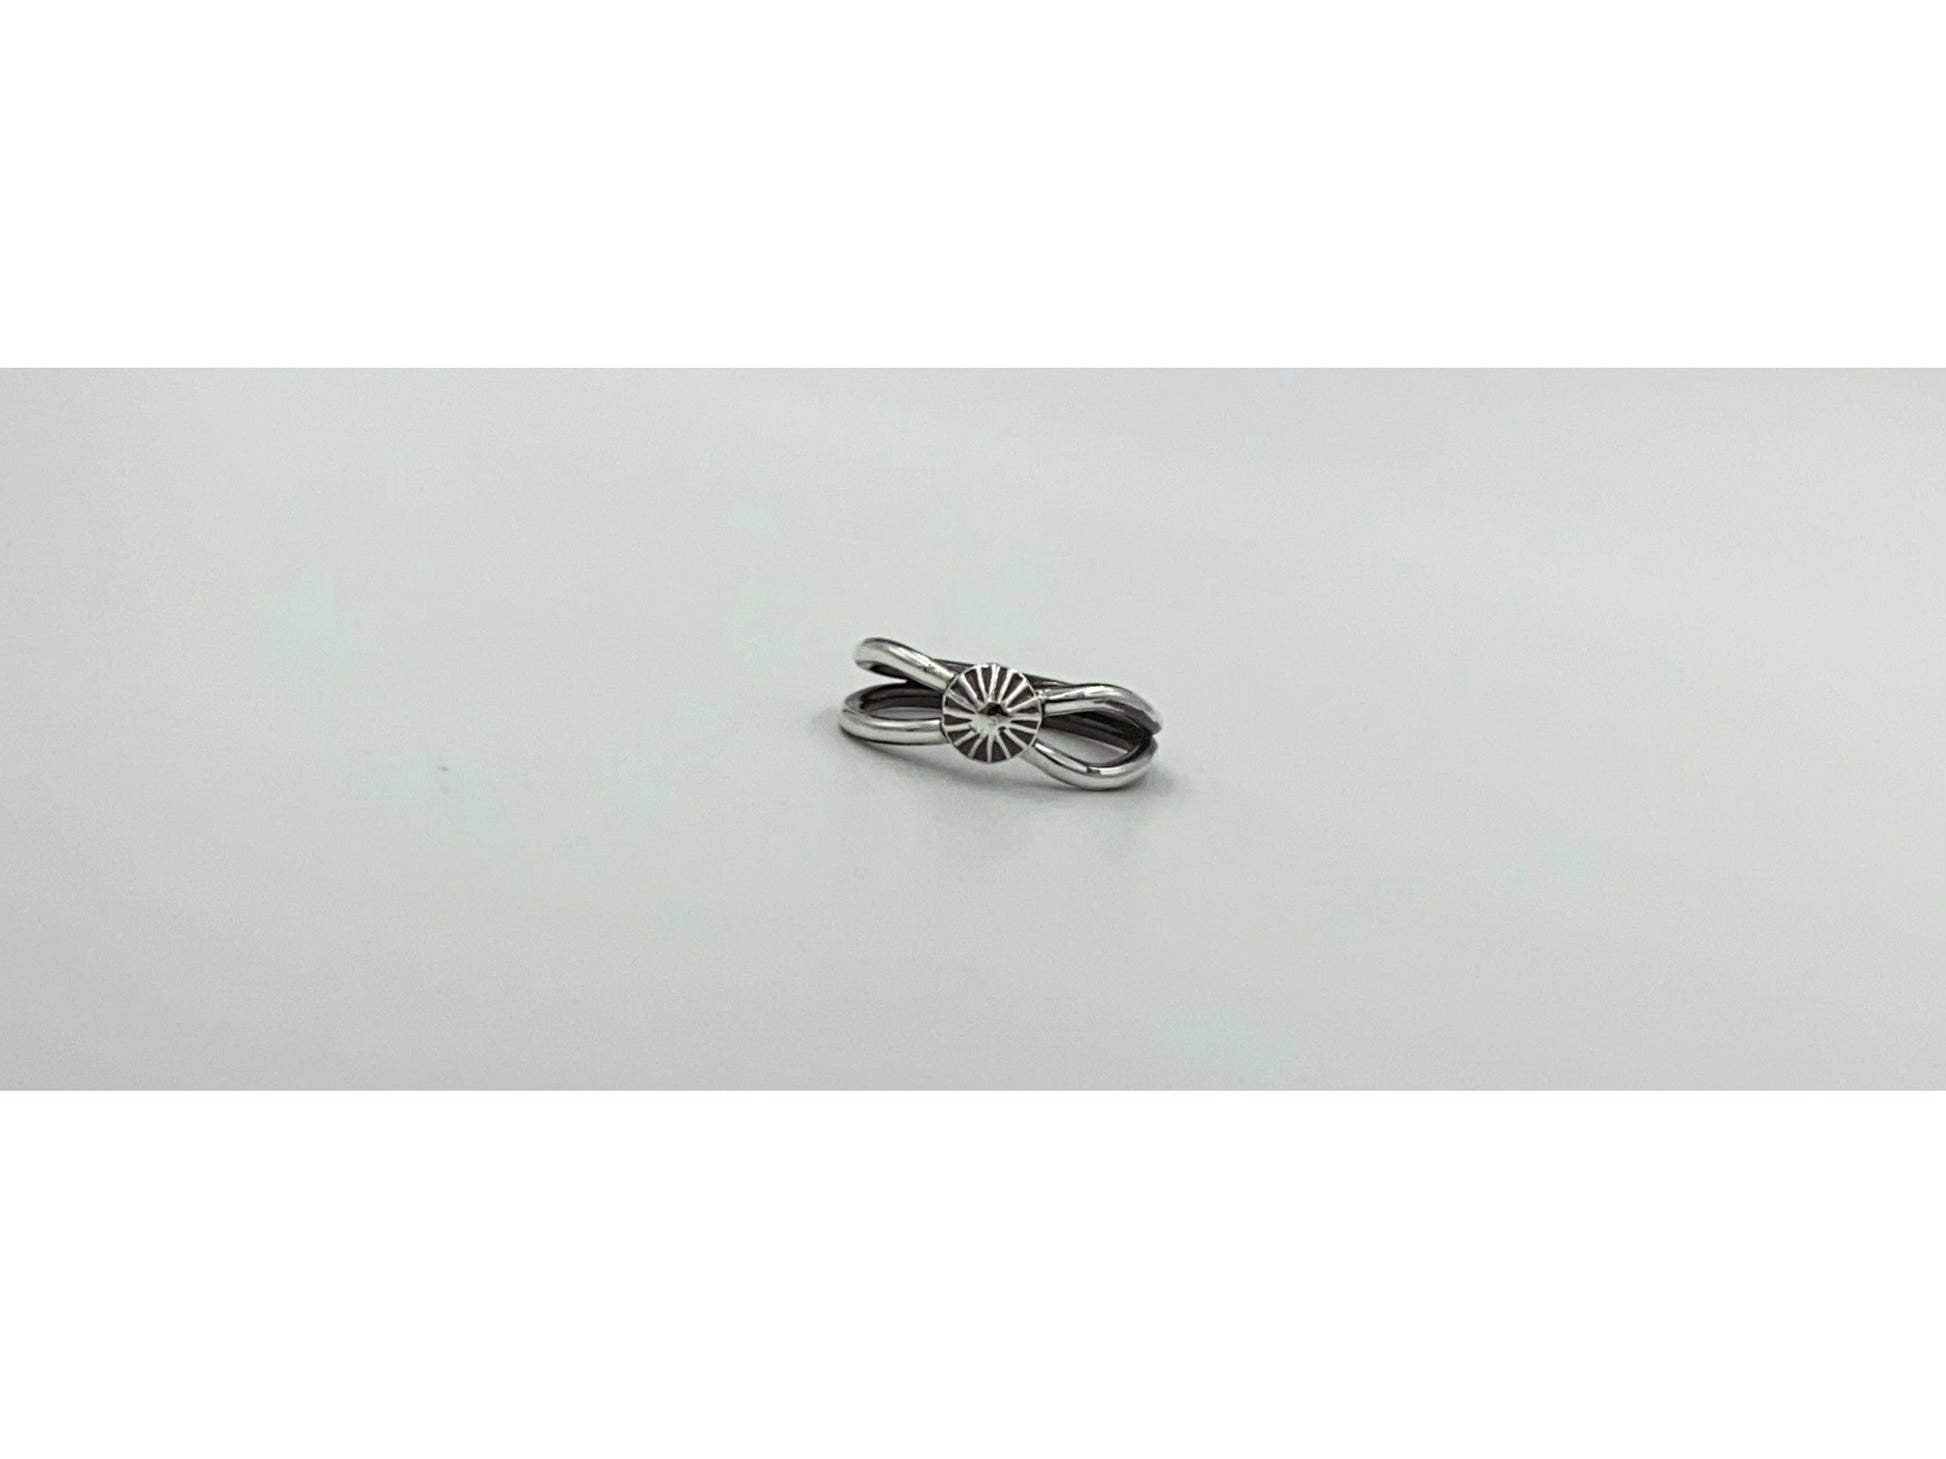 Split shank ring with center focal of a spiral ornated silver pendent. Small and dainty